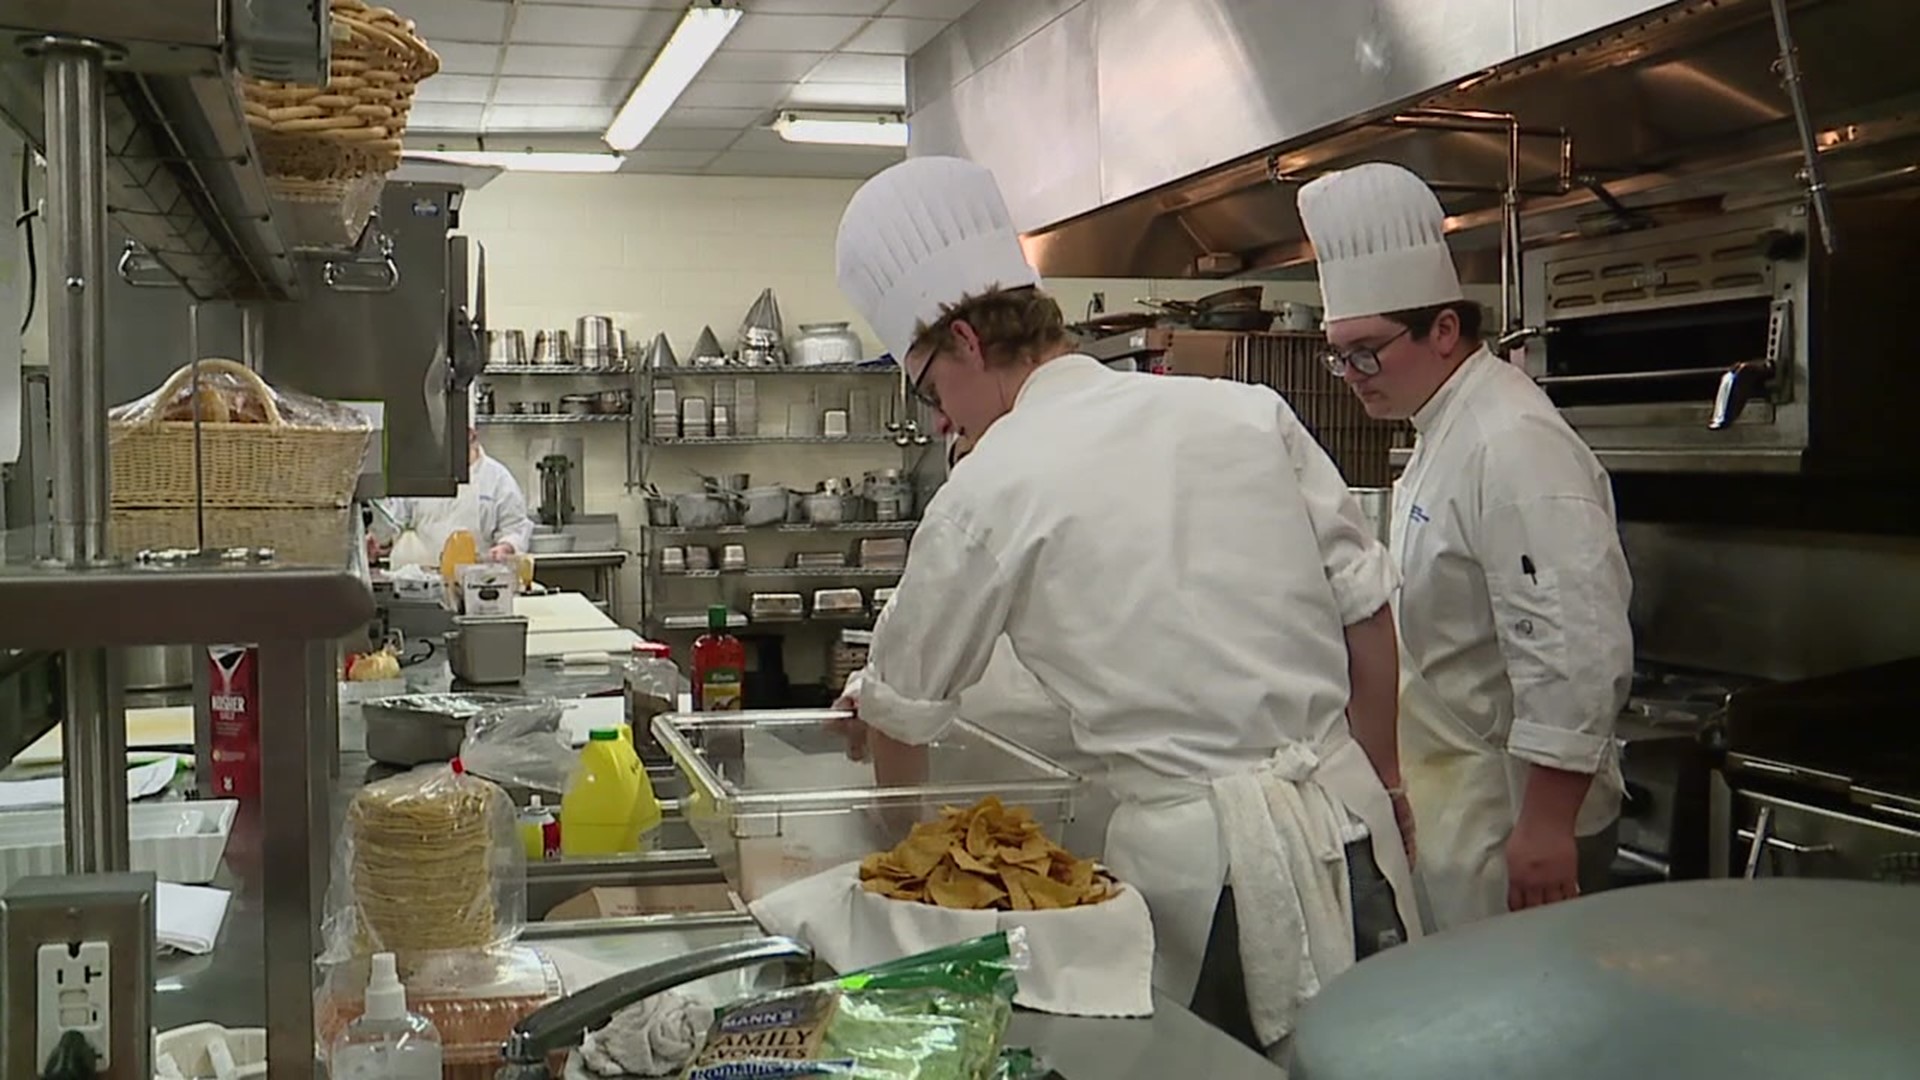 Students in the culinary arts program at the Pennsylvania College of Technology will cook for more than 25,000 people at the Kentucky Derby.